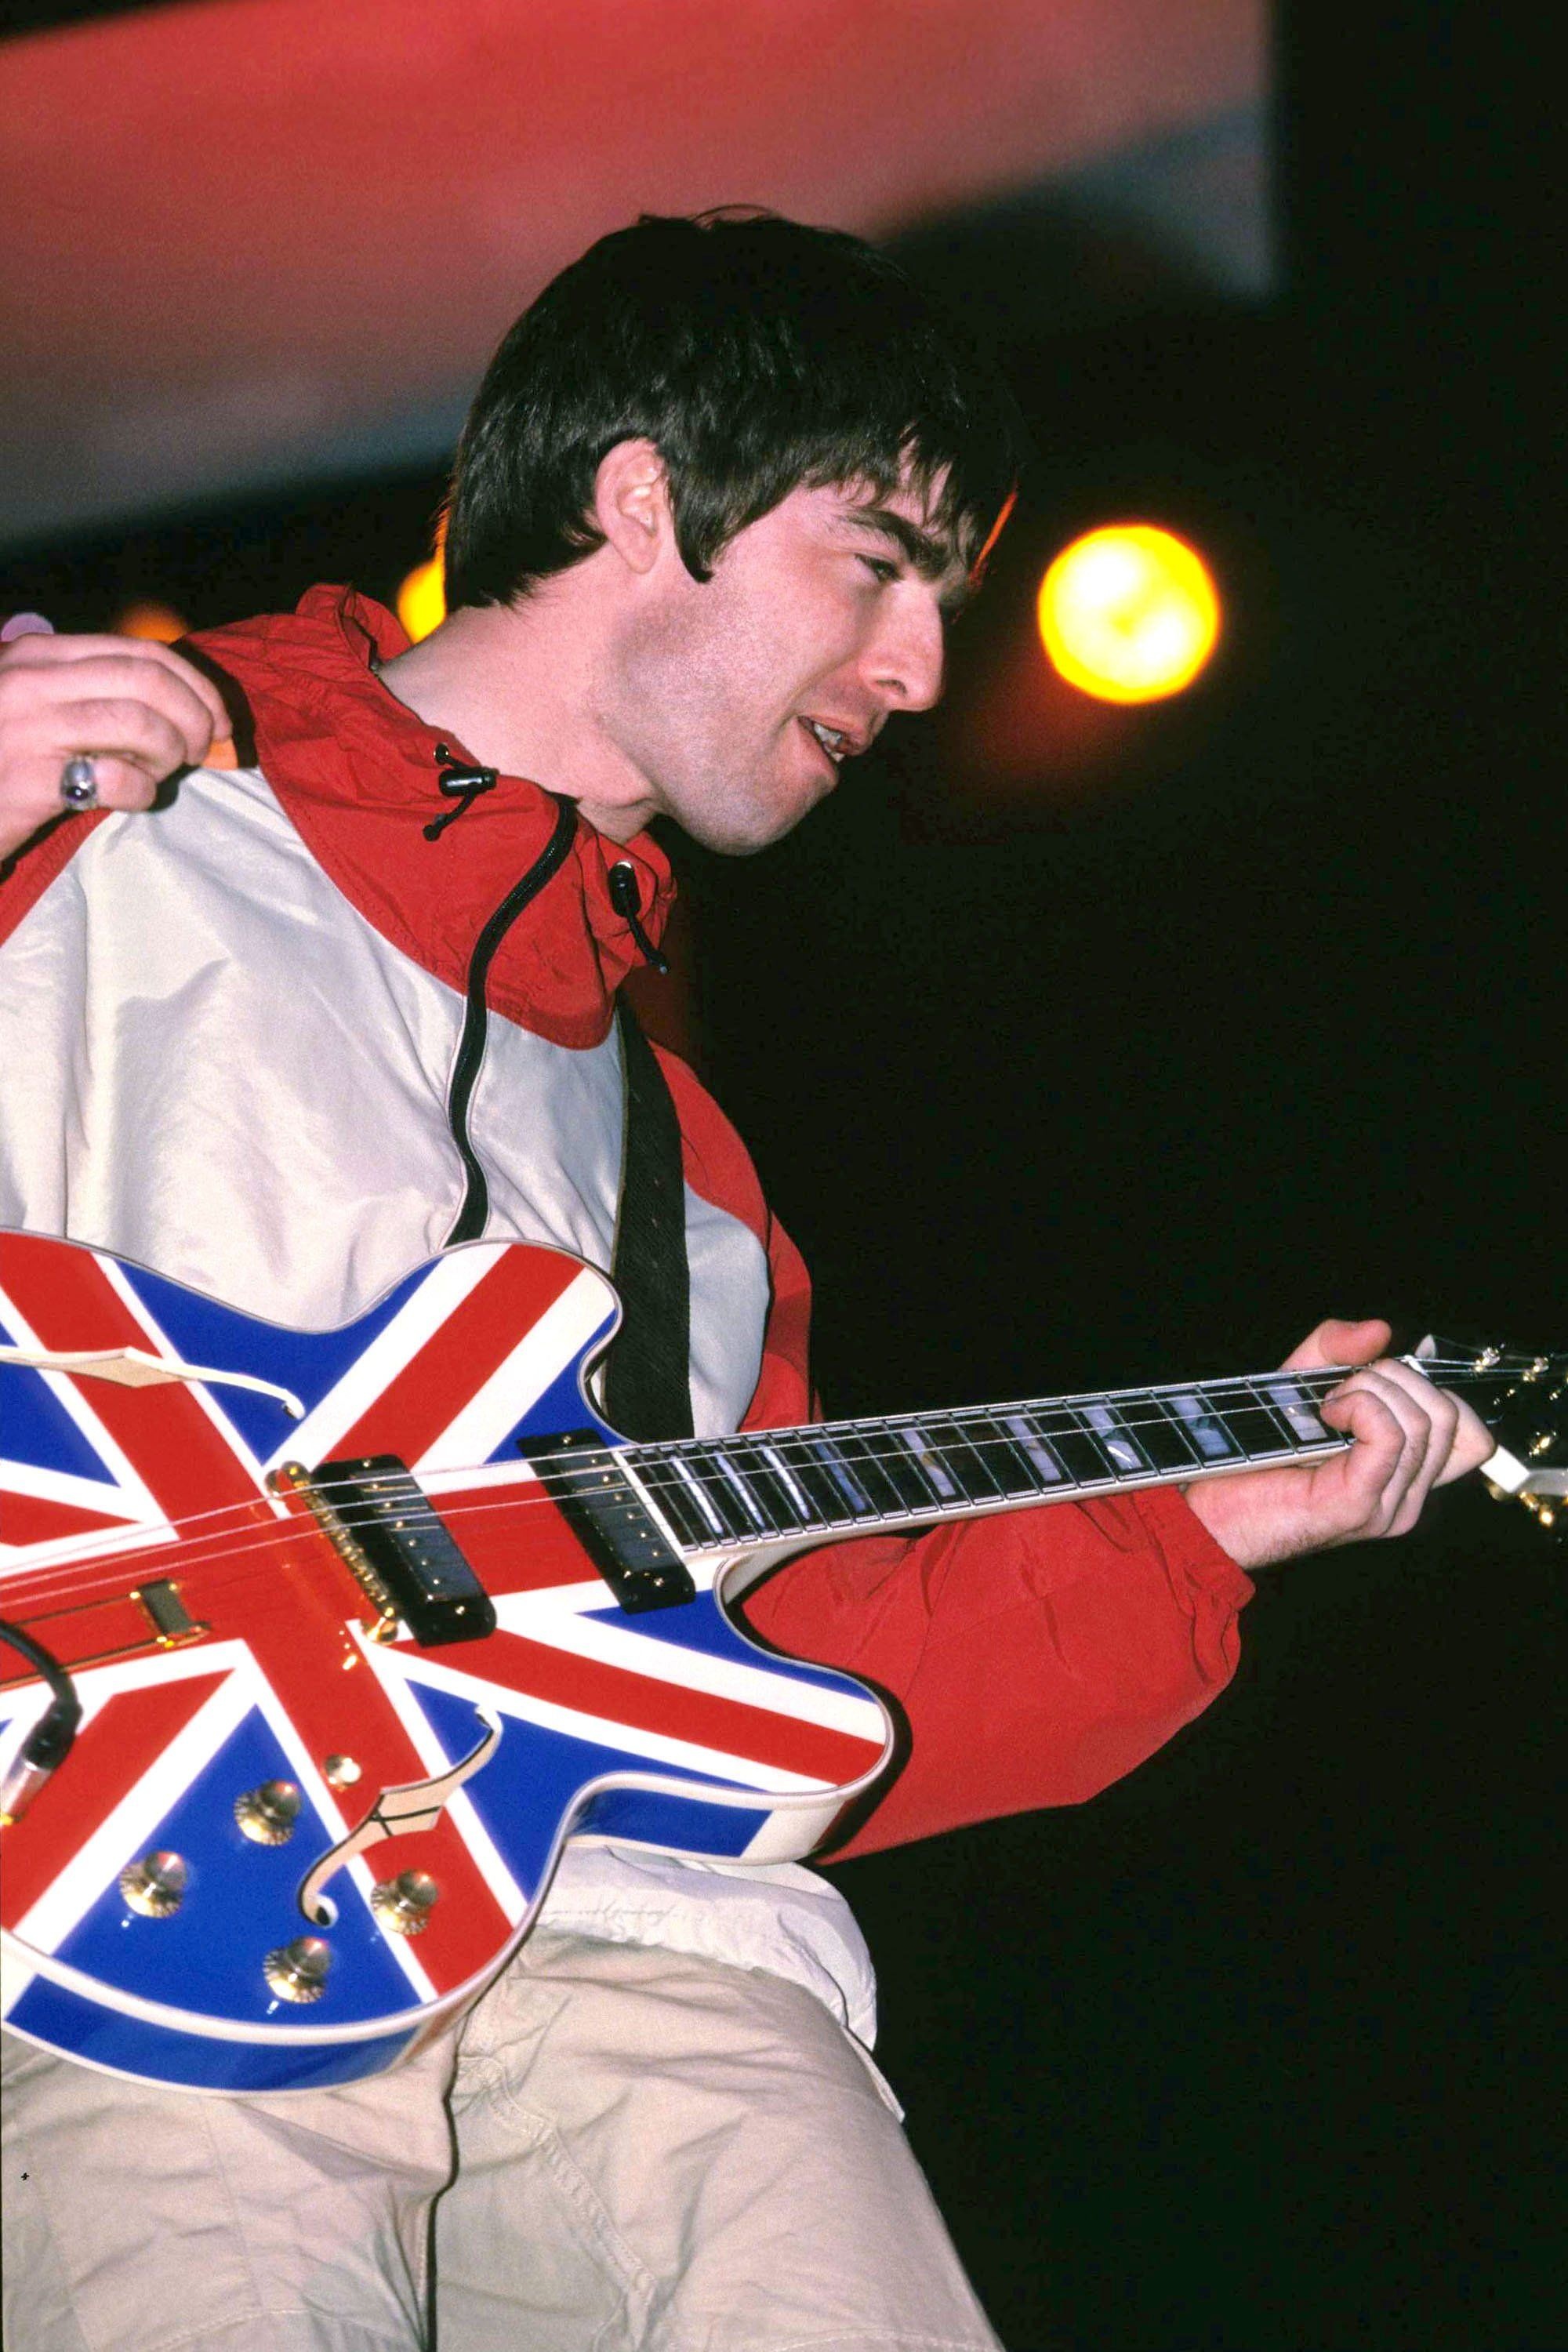 HD wallpaper, Oasis Music, Noel Gallagher, 2000X3000 Hd Phone, Samsung Hd Noel Gallagher Wallpaper Image, 90S Looks, Young